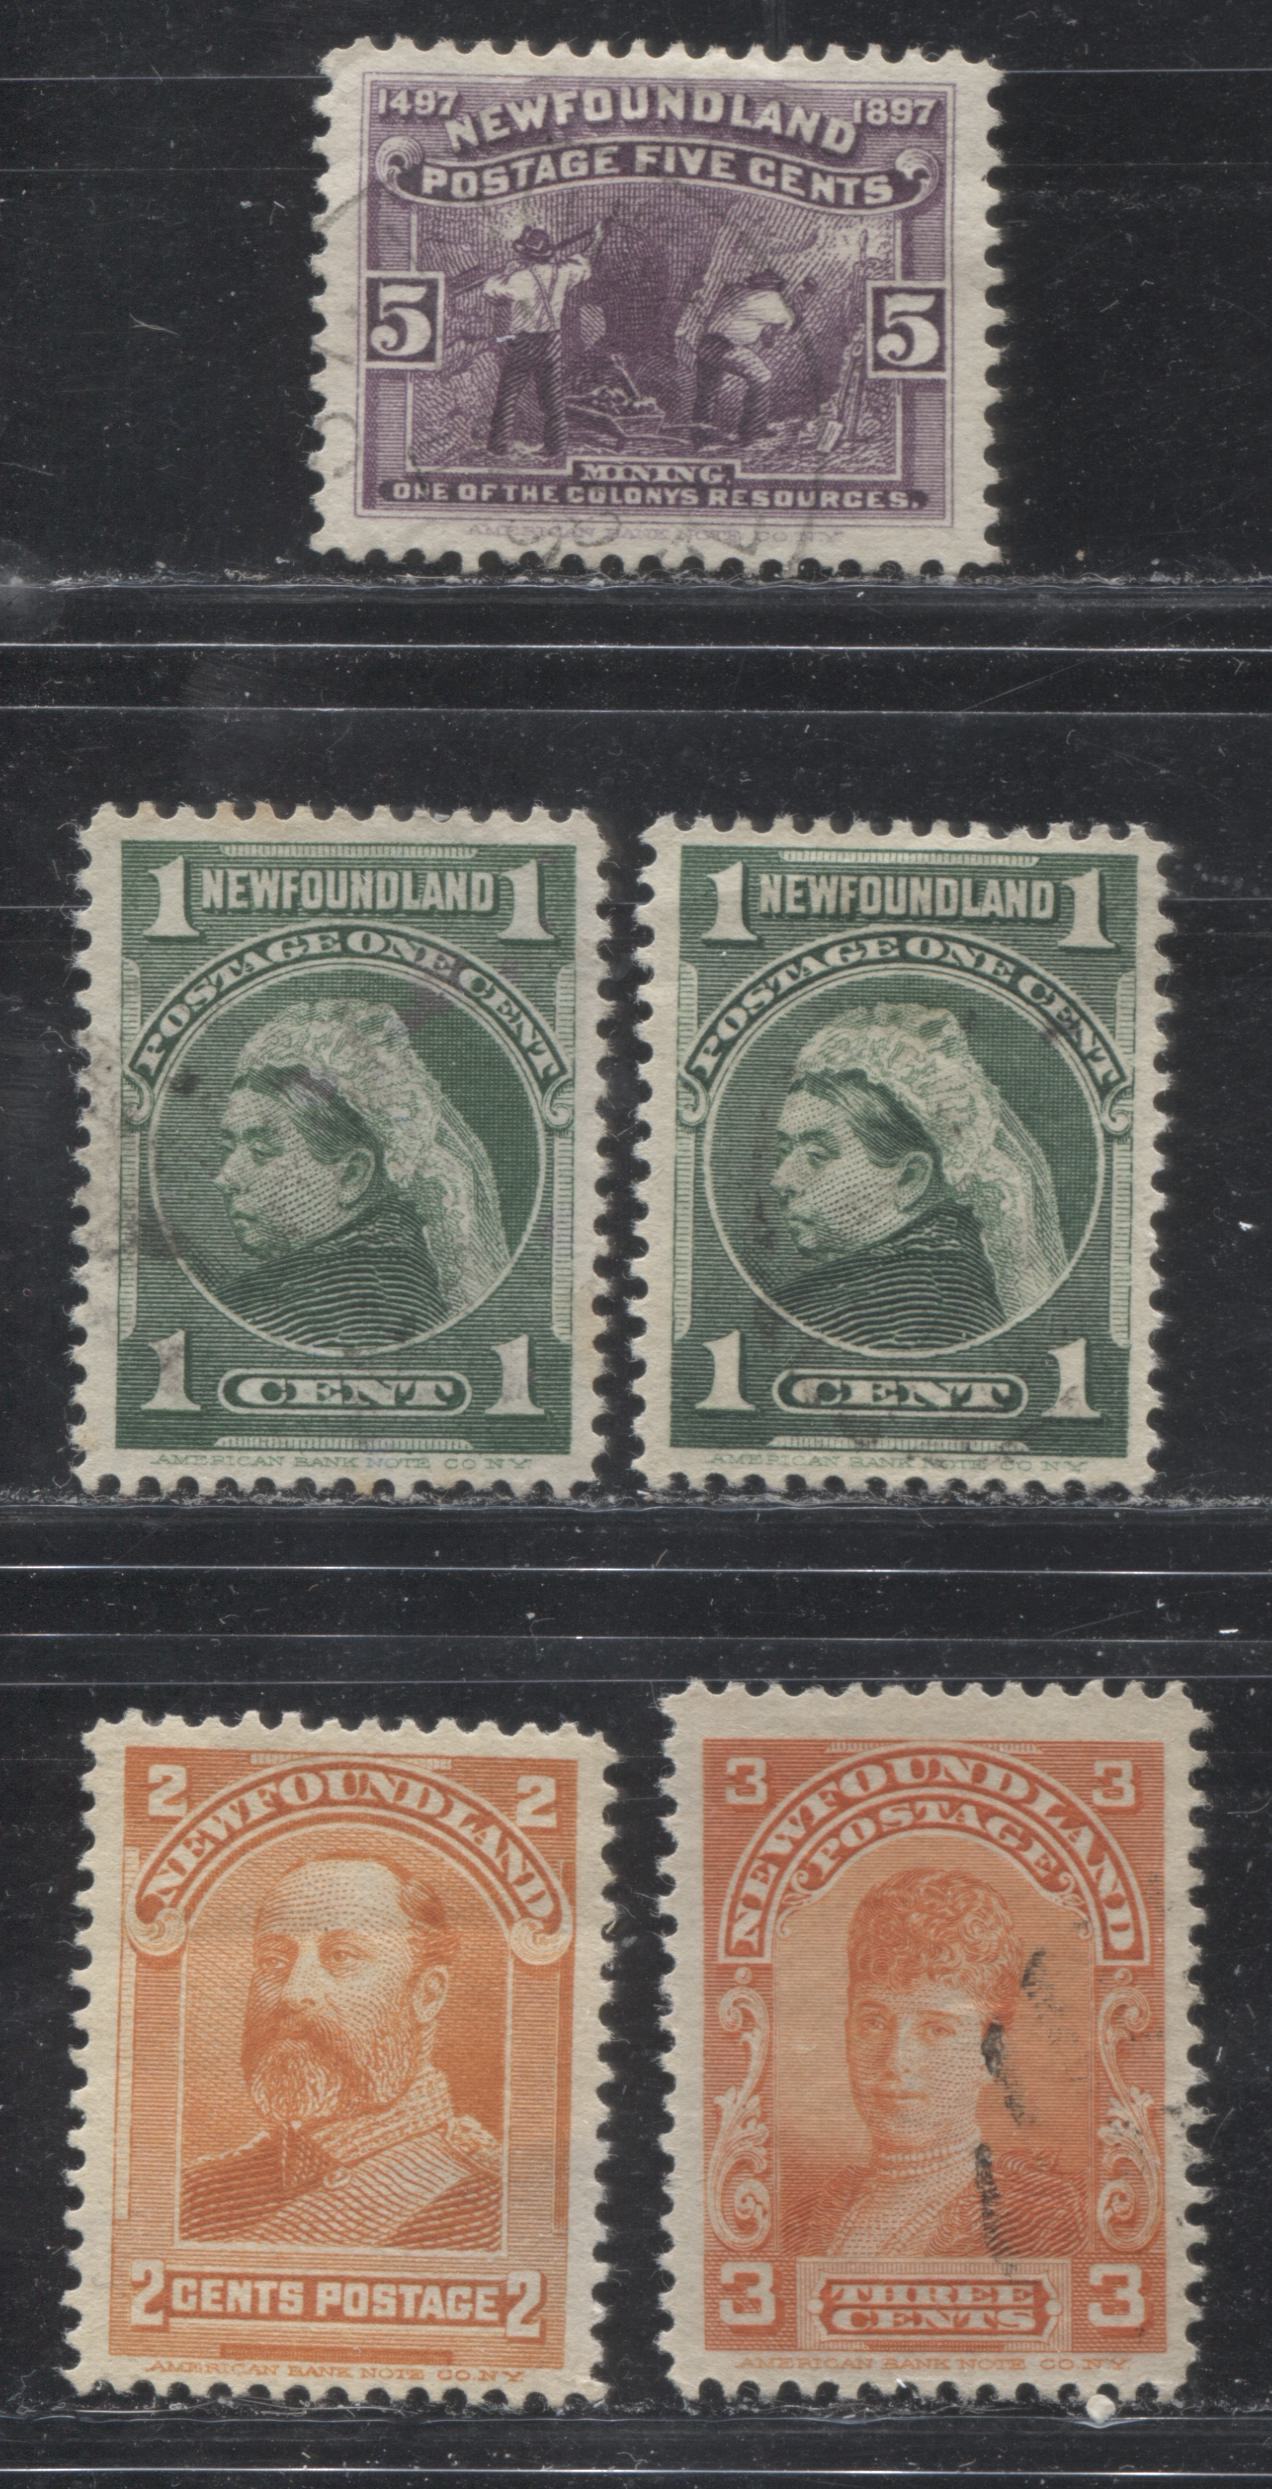 Lot 94 Newfoundland #65,80a,81,83c 5c, 1c, 2c & 3c Violet, Deep Green & Orange Mining, Queen Victoria, King Edward VII & Queen Alexandra, 1897 Discovery Of Newfoundland & 1897-1901 Royal Family Issues, 5 Very Fine Used Singles, Two Shades Of The 1c